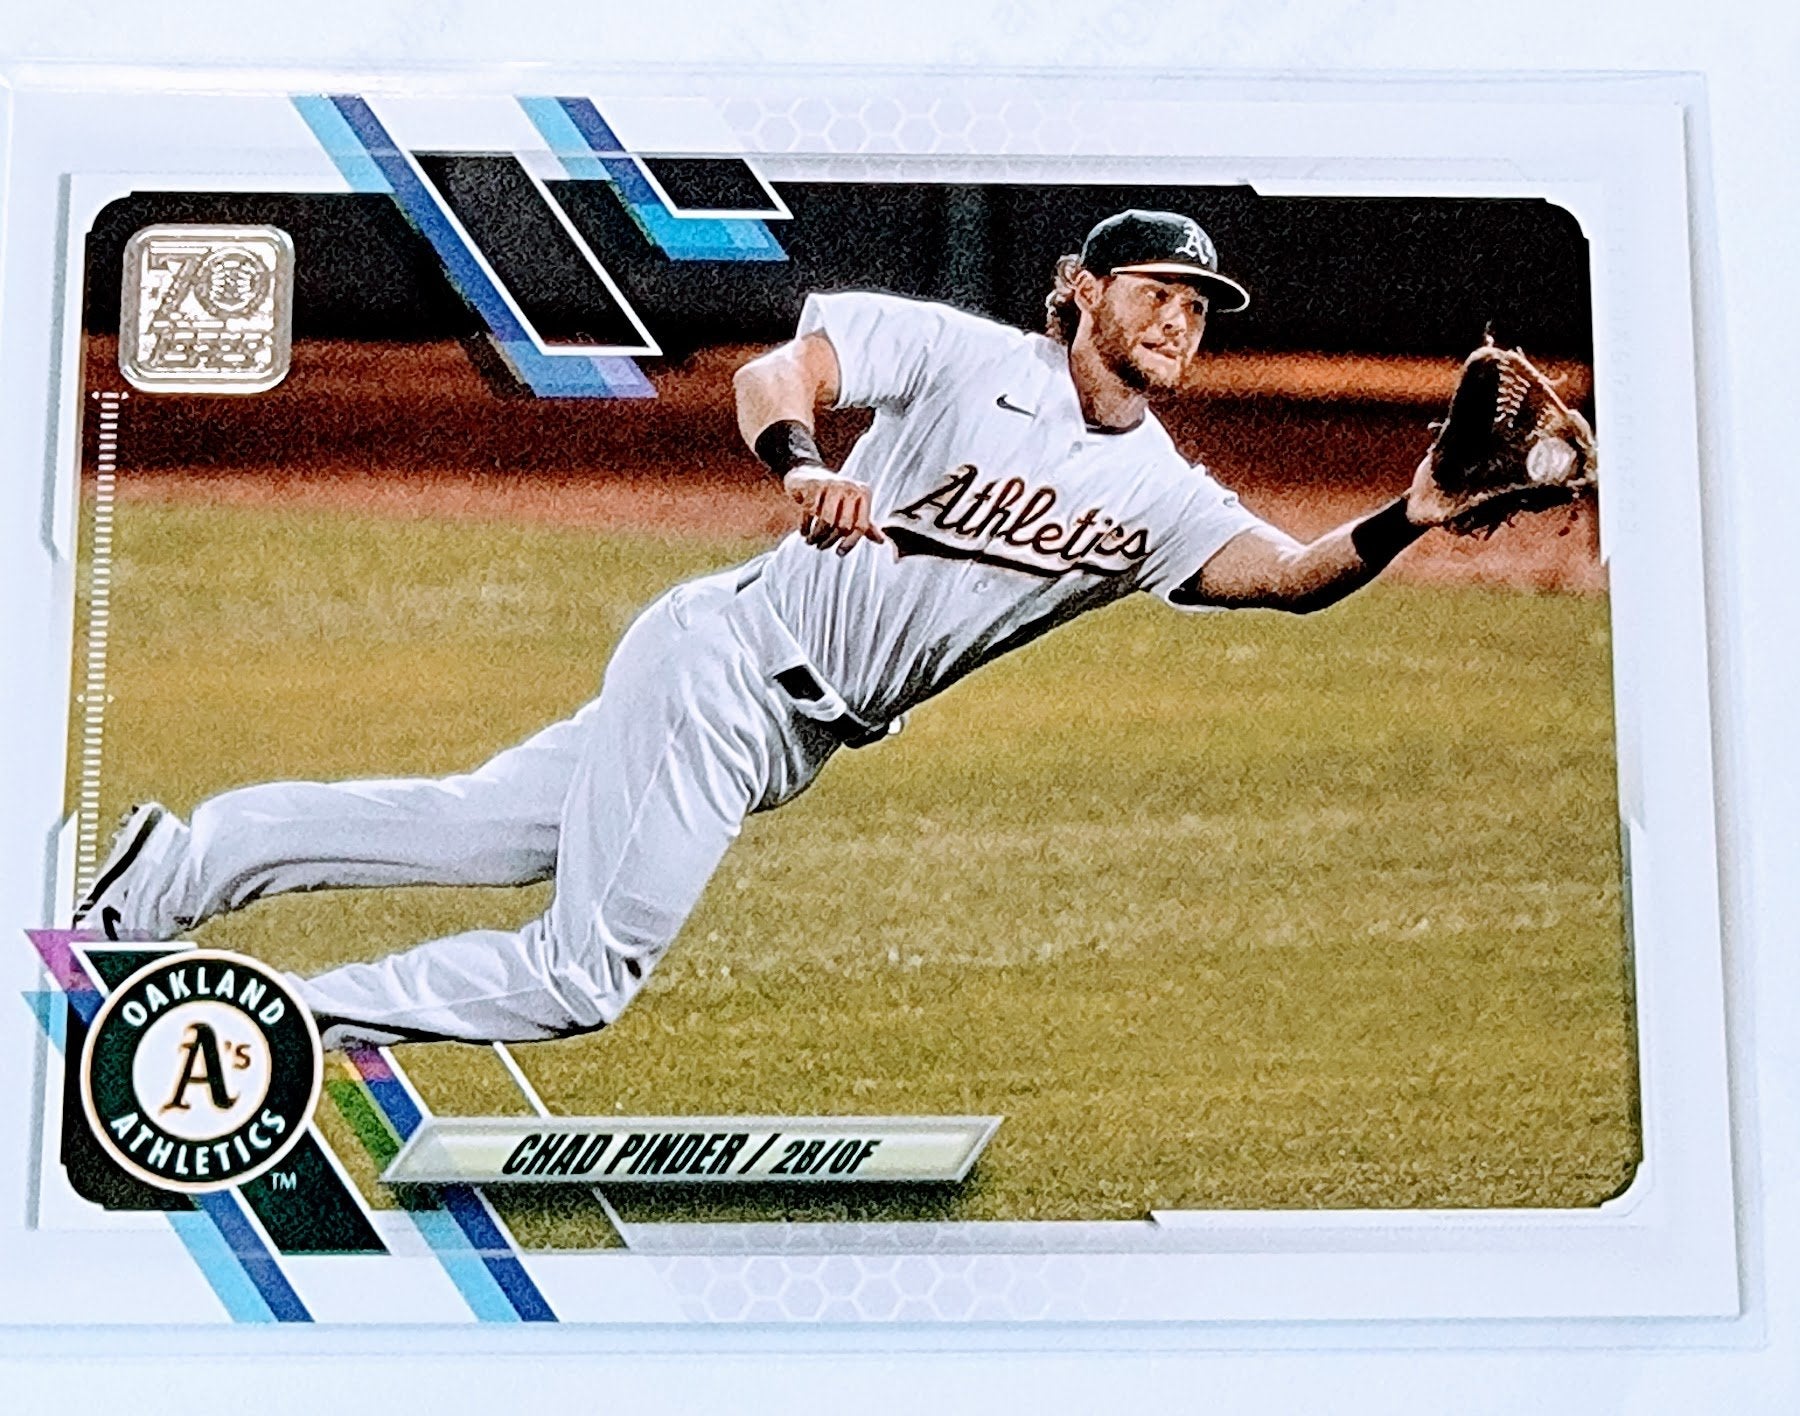 2021 Topps Update Chad Pinder Baseball Trading Card SMCB1 simple Xclusive Collectibles   